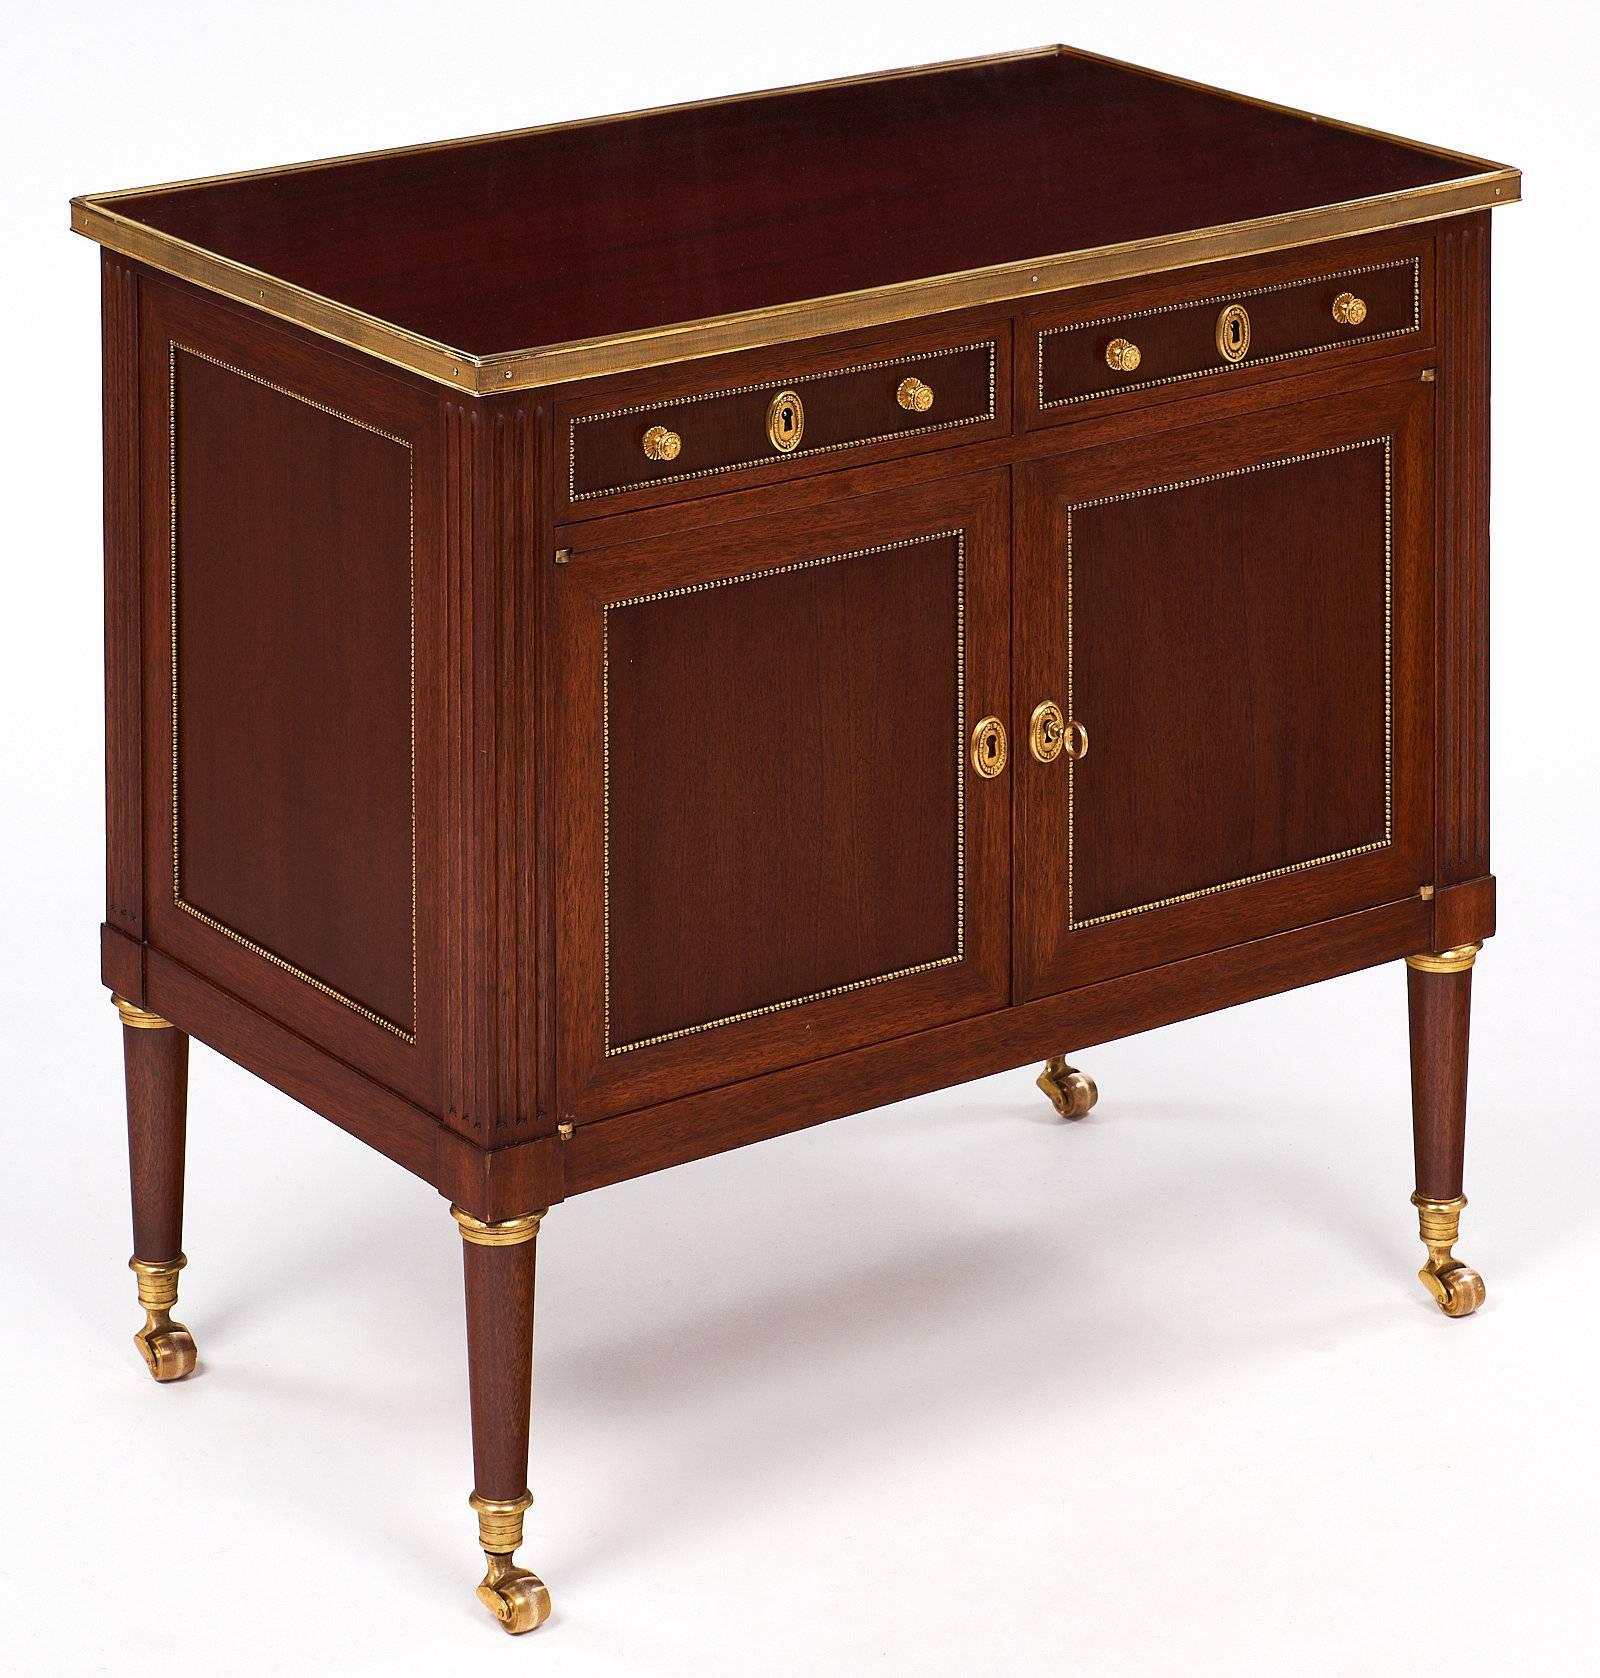 A very fine mahogany chest on solid gilded brass casters in the Louis XVI style. This small case piece rests on tapered legs with gilt brass trims. The hardware and trim throughout are also brass. There are two small drawers above two doors. We